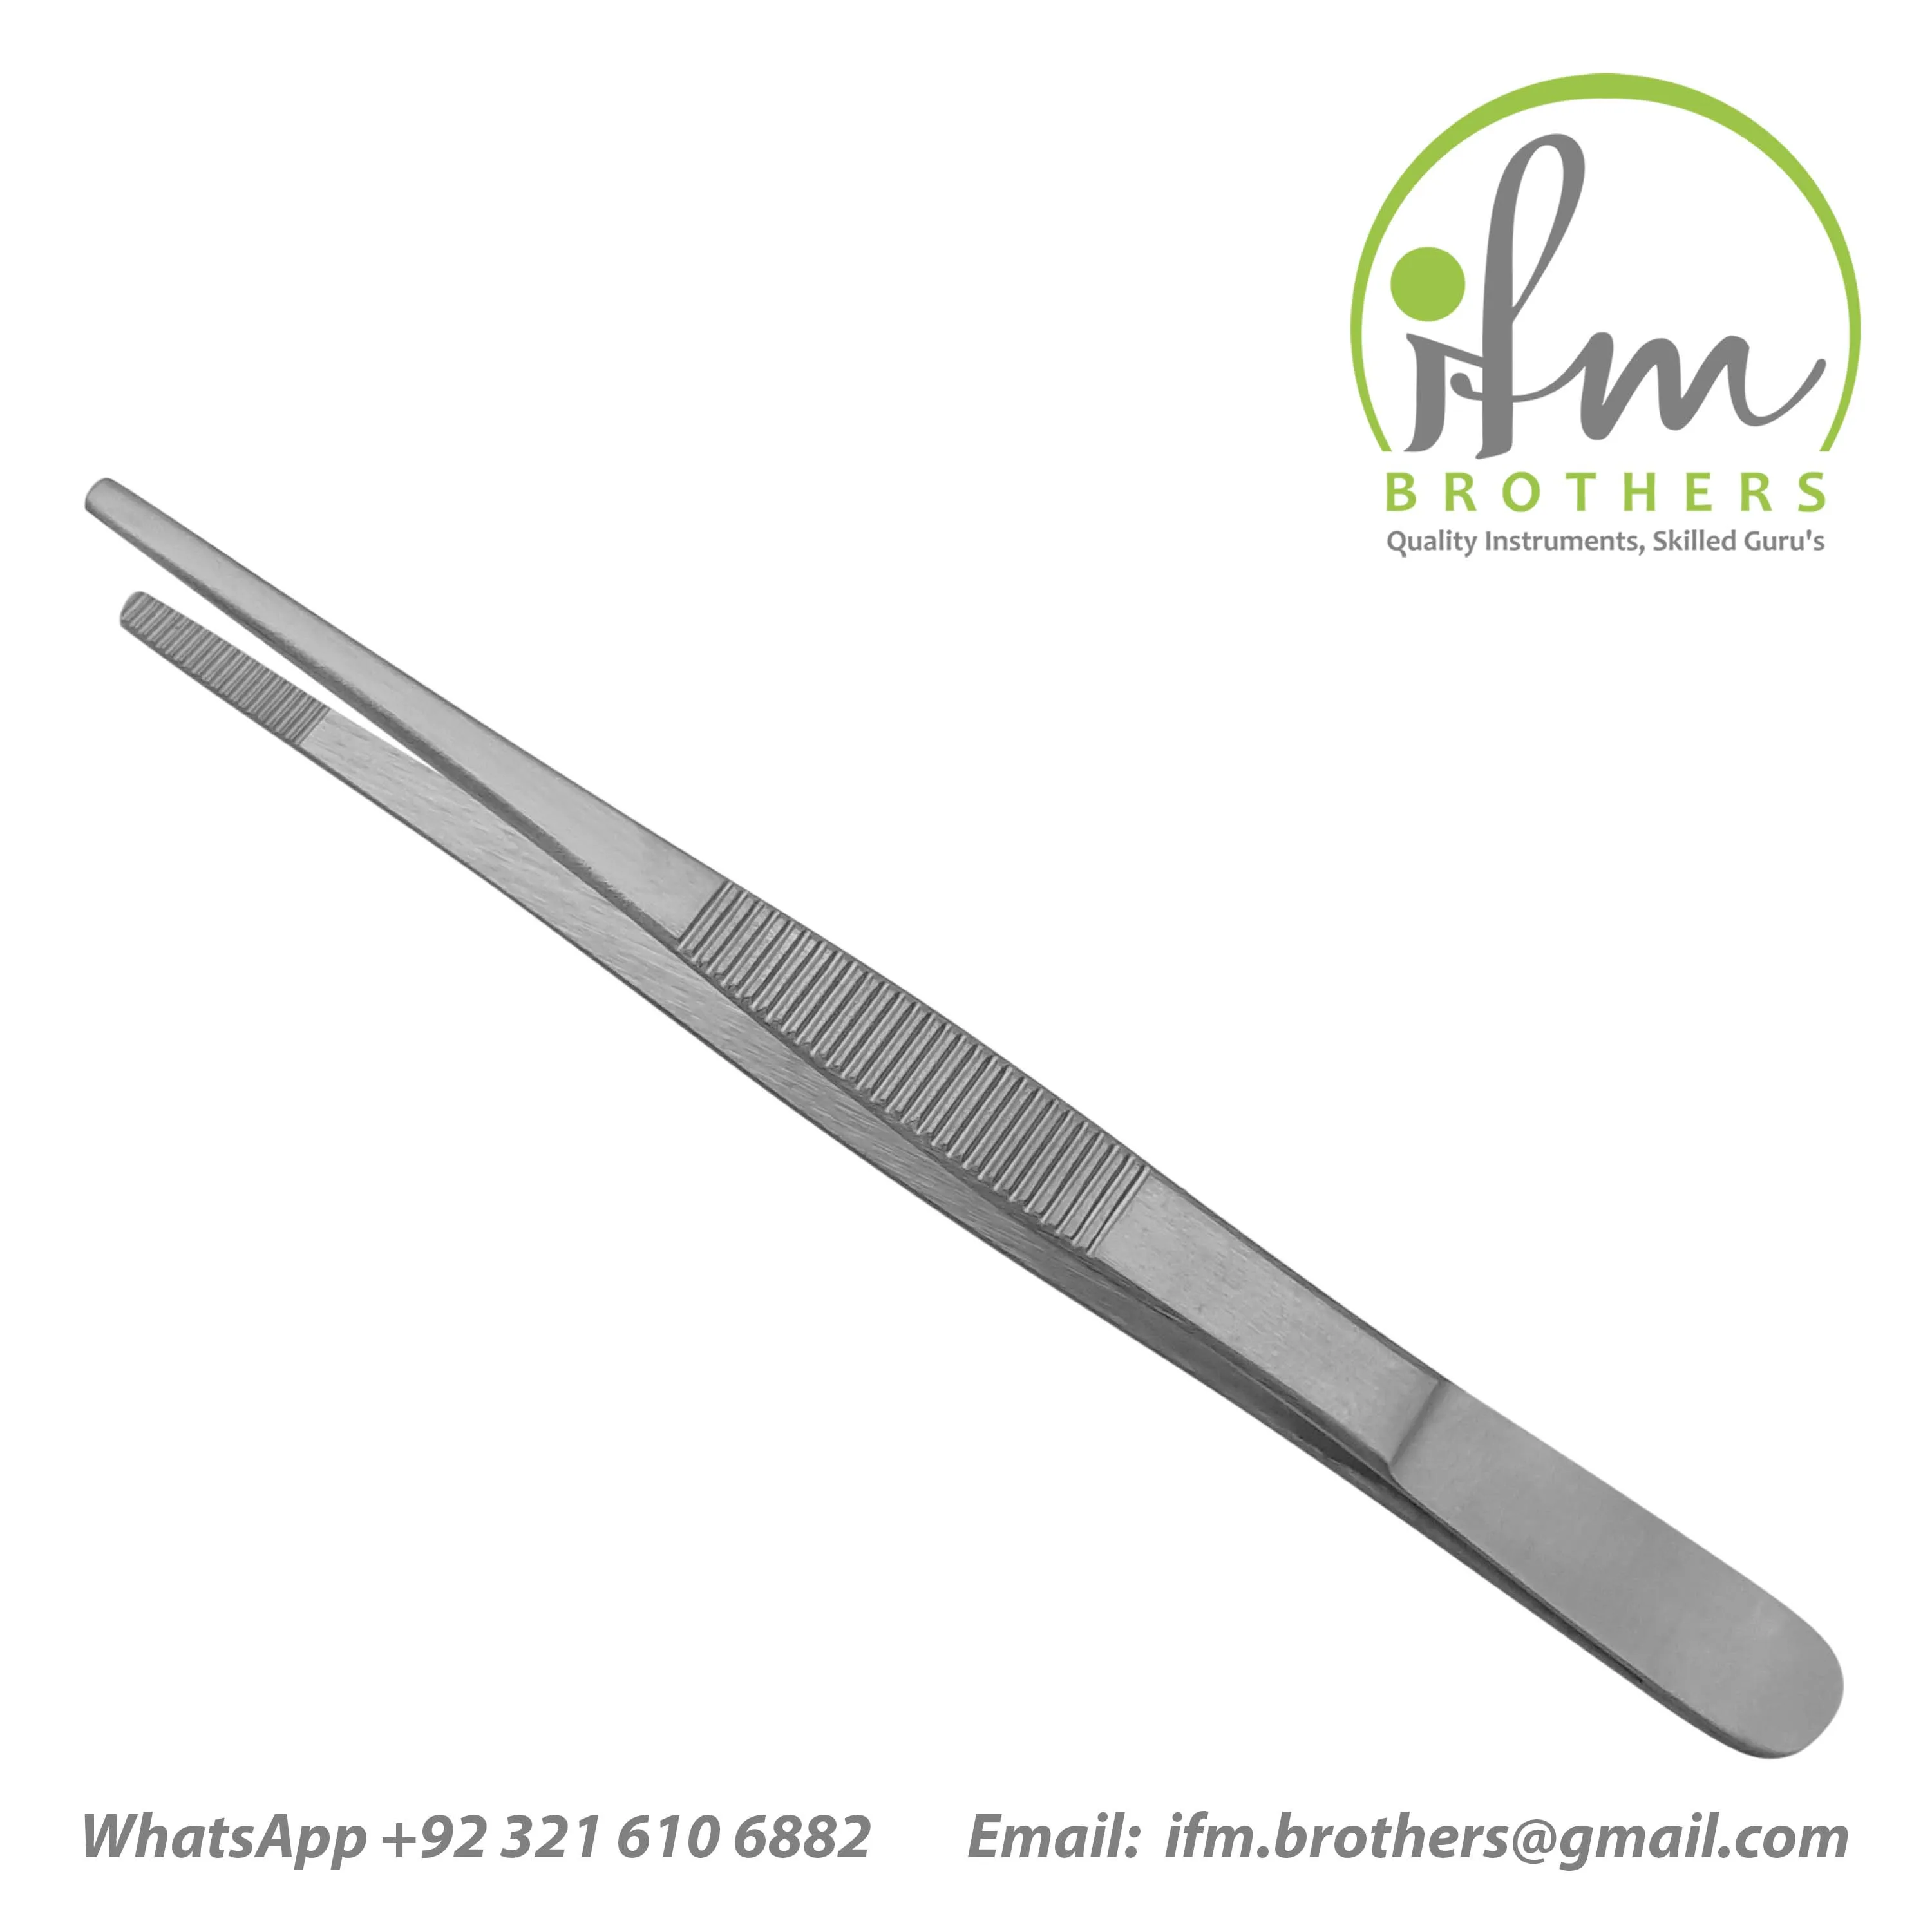 Surgical Thumb Dressing Forceps Surgical Single Use Dressing Forceps ...